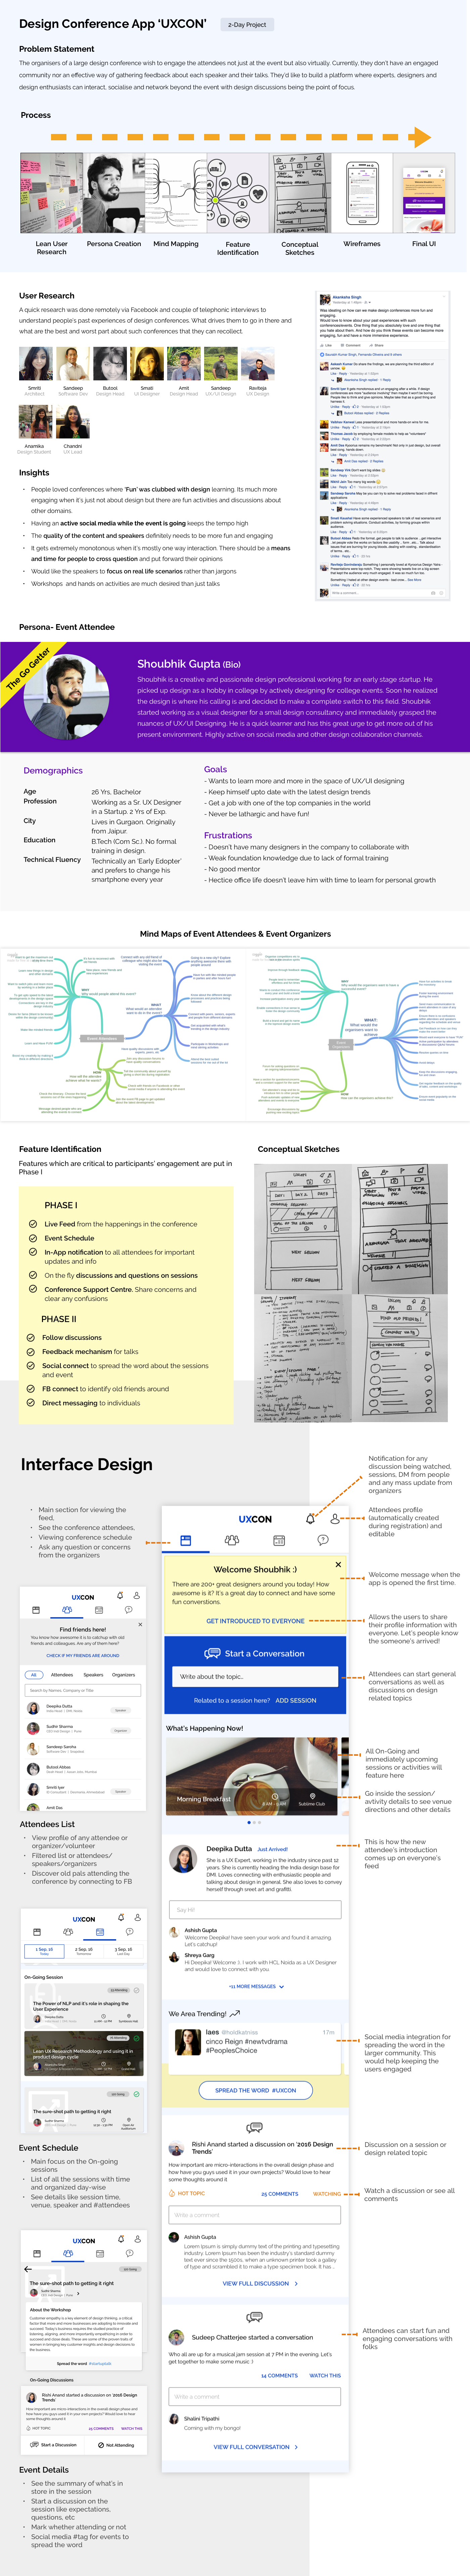 design conference Android App Mobile app UX Research UX design Social app design process prototype personas mind maps